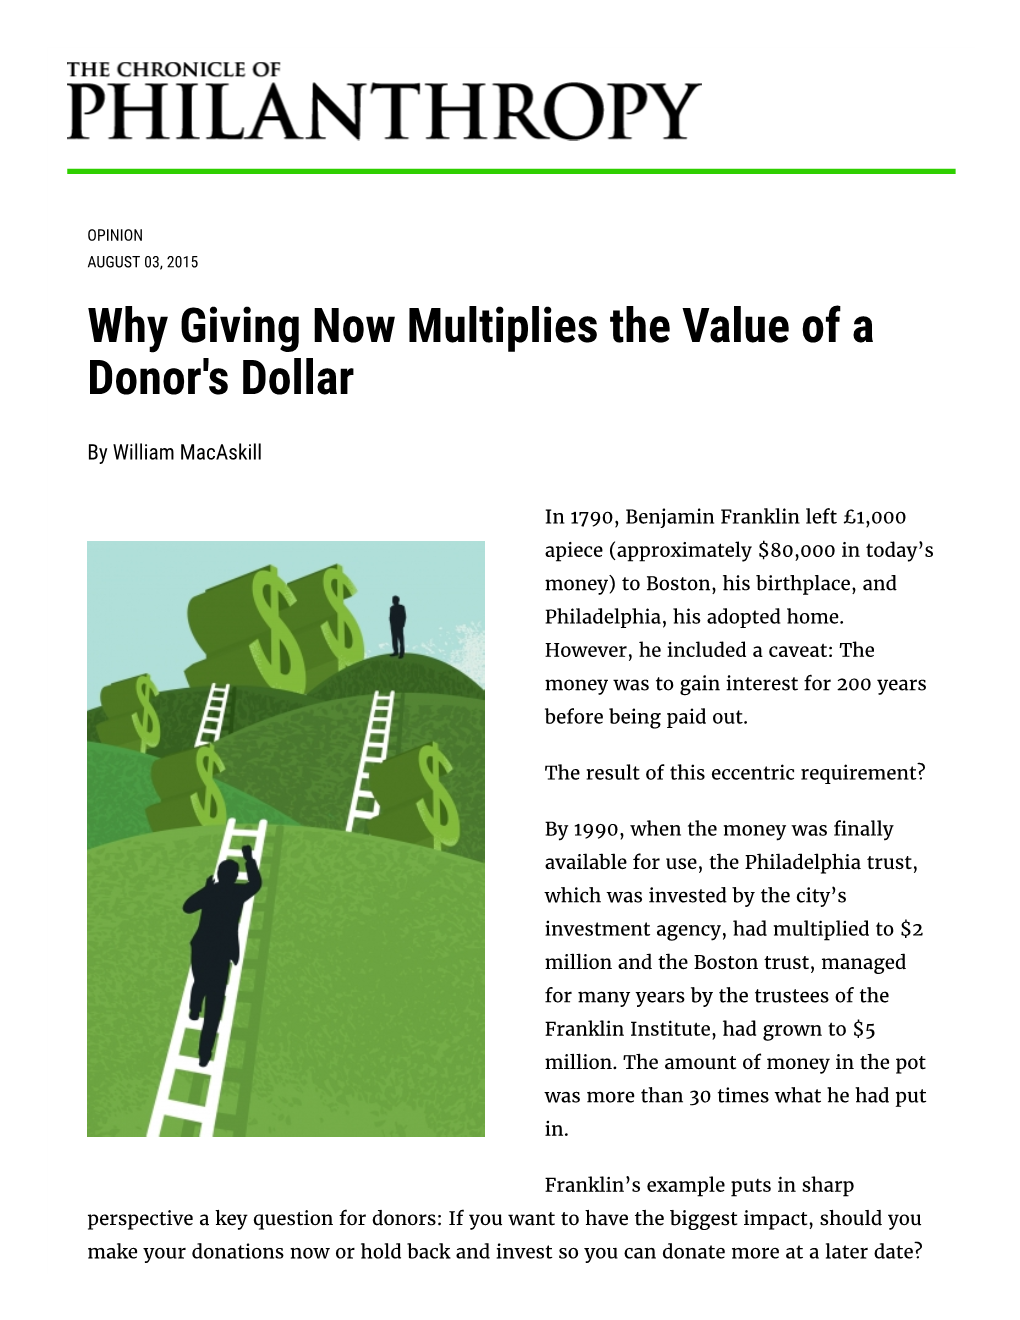 Why Giving Now Multiplies the Value of a Donor's Dollar